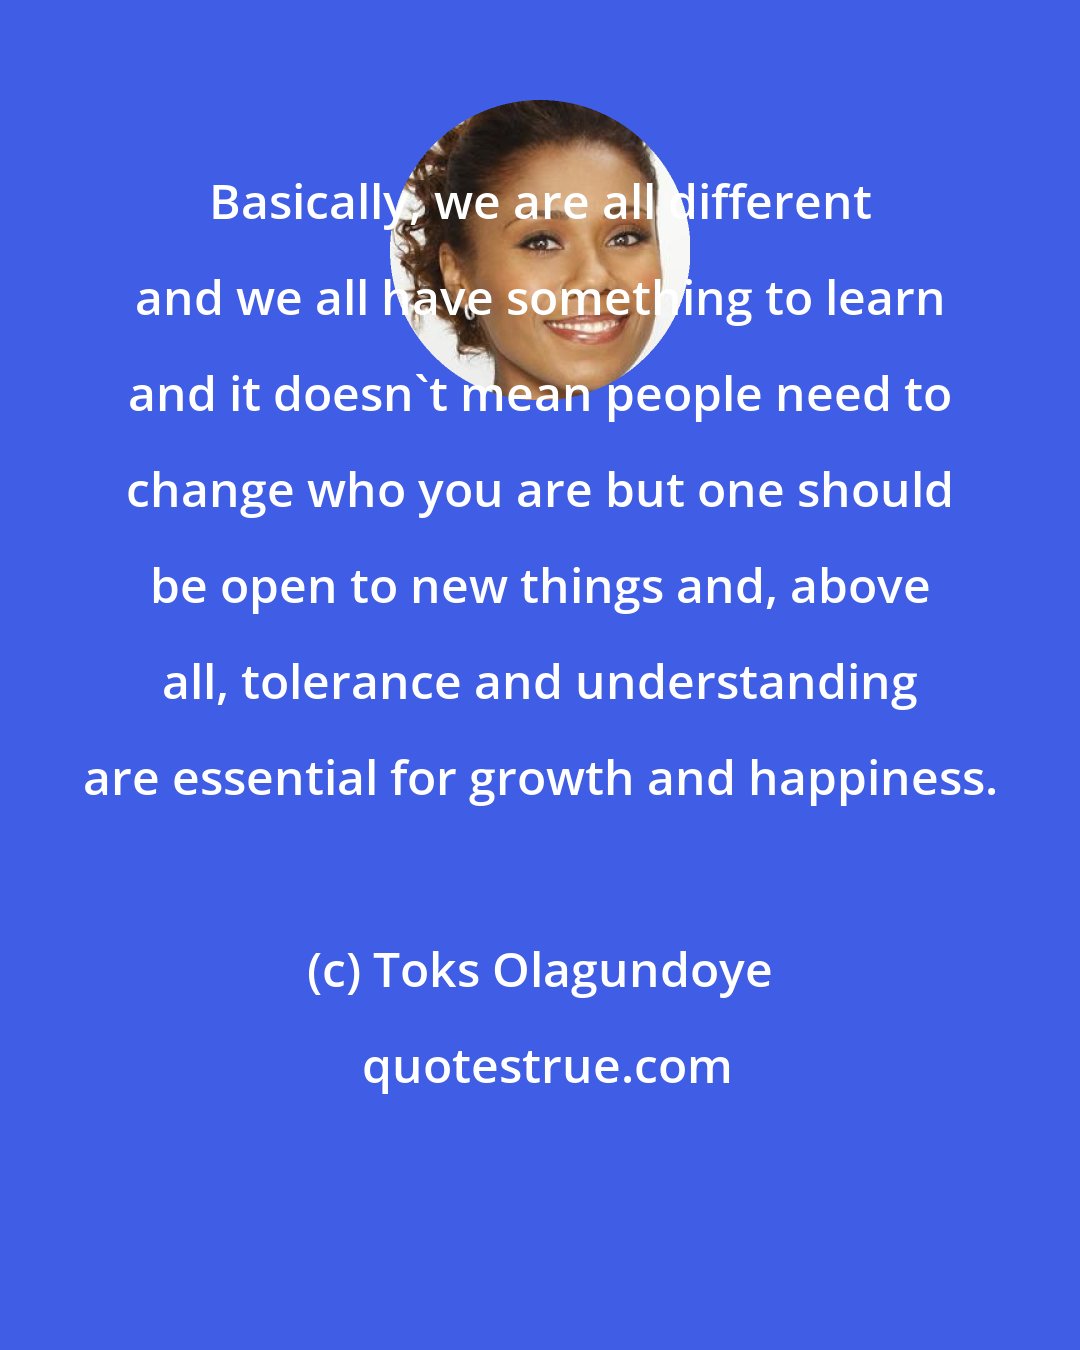 Toks Olagundoye: Basically, we are all different and we all have something to learn and it doesn't mean people need to change who you are but one should be open to new things and, above all, tolerance and understanding are essential for growth and happiness.